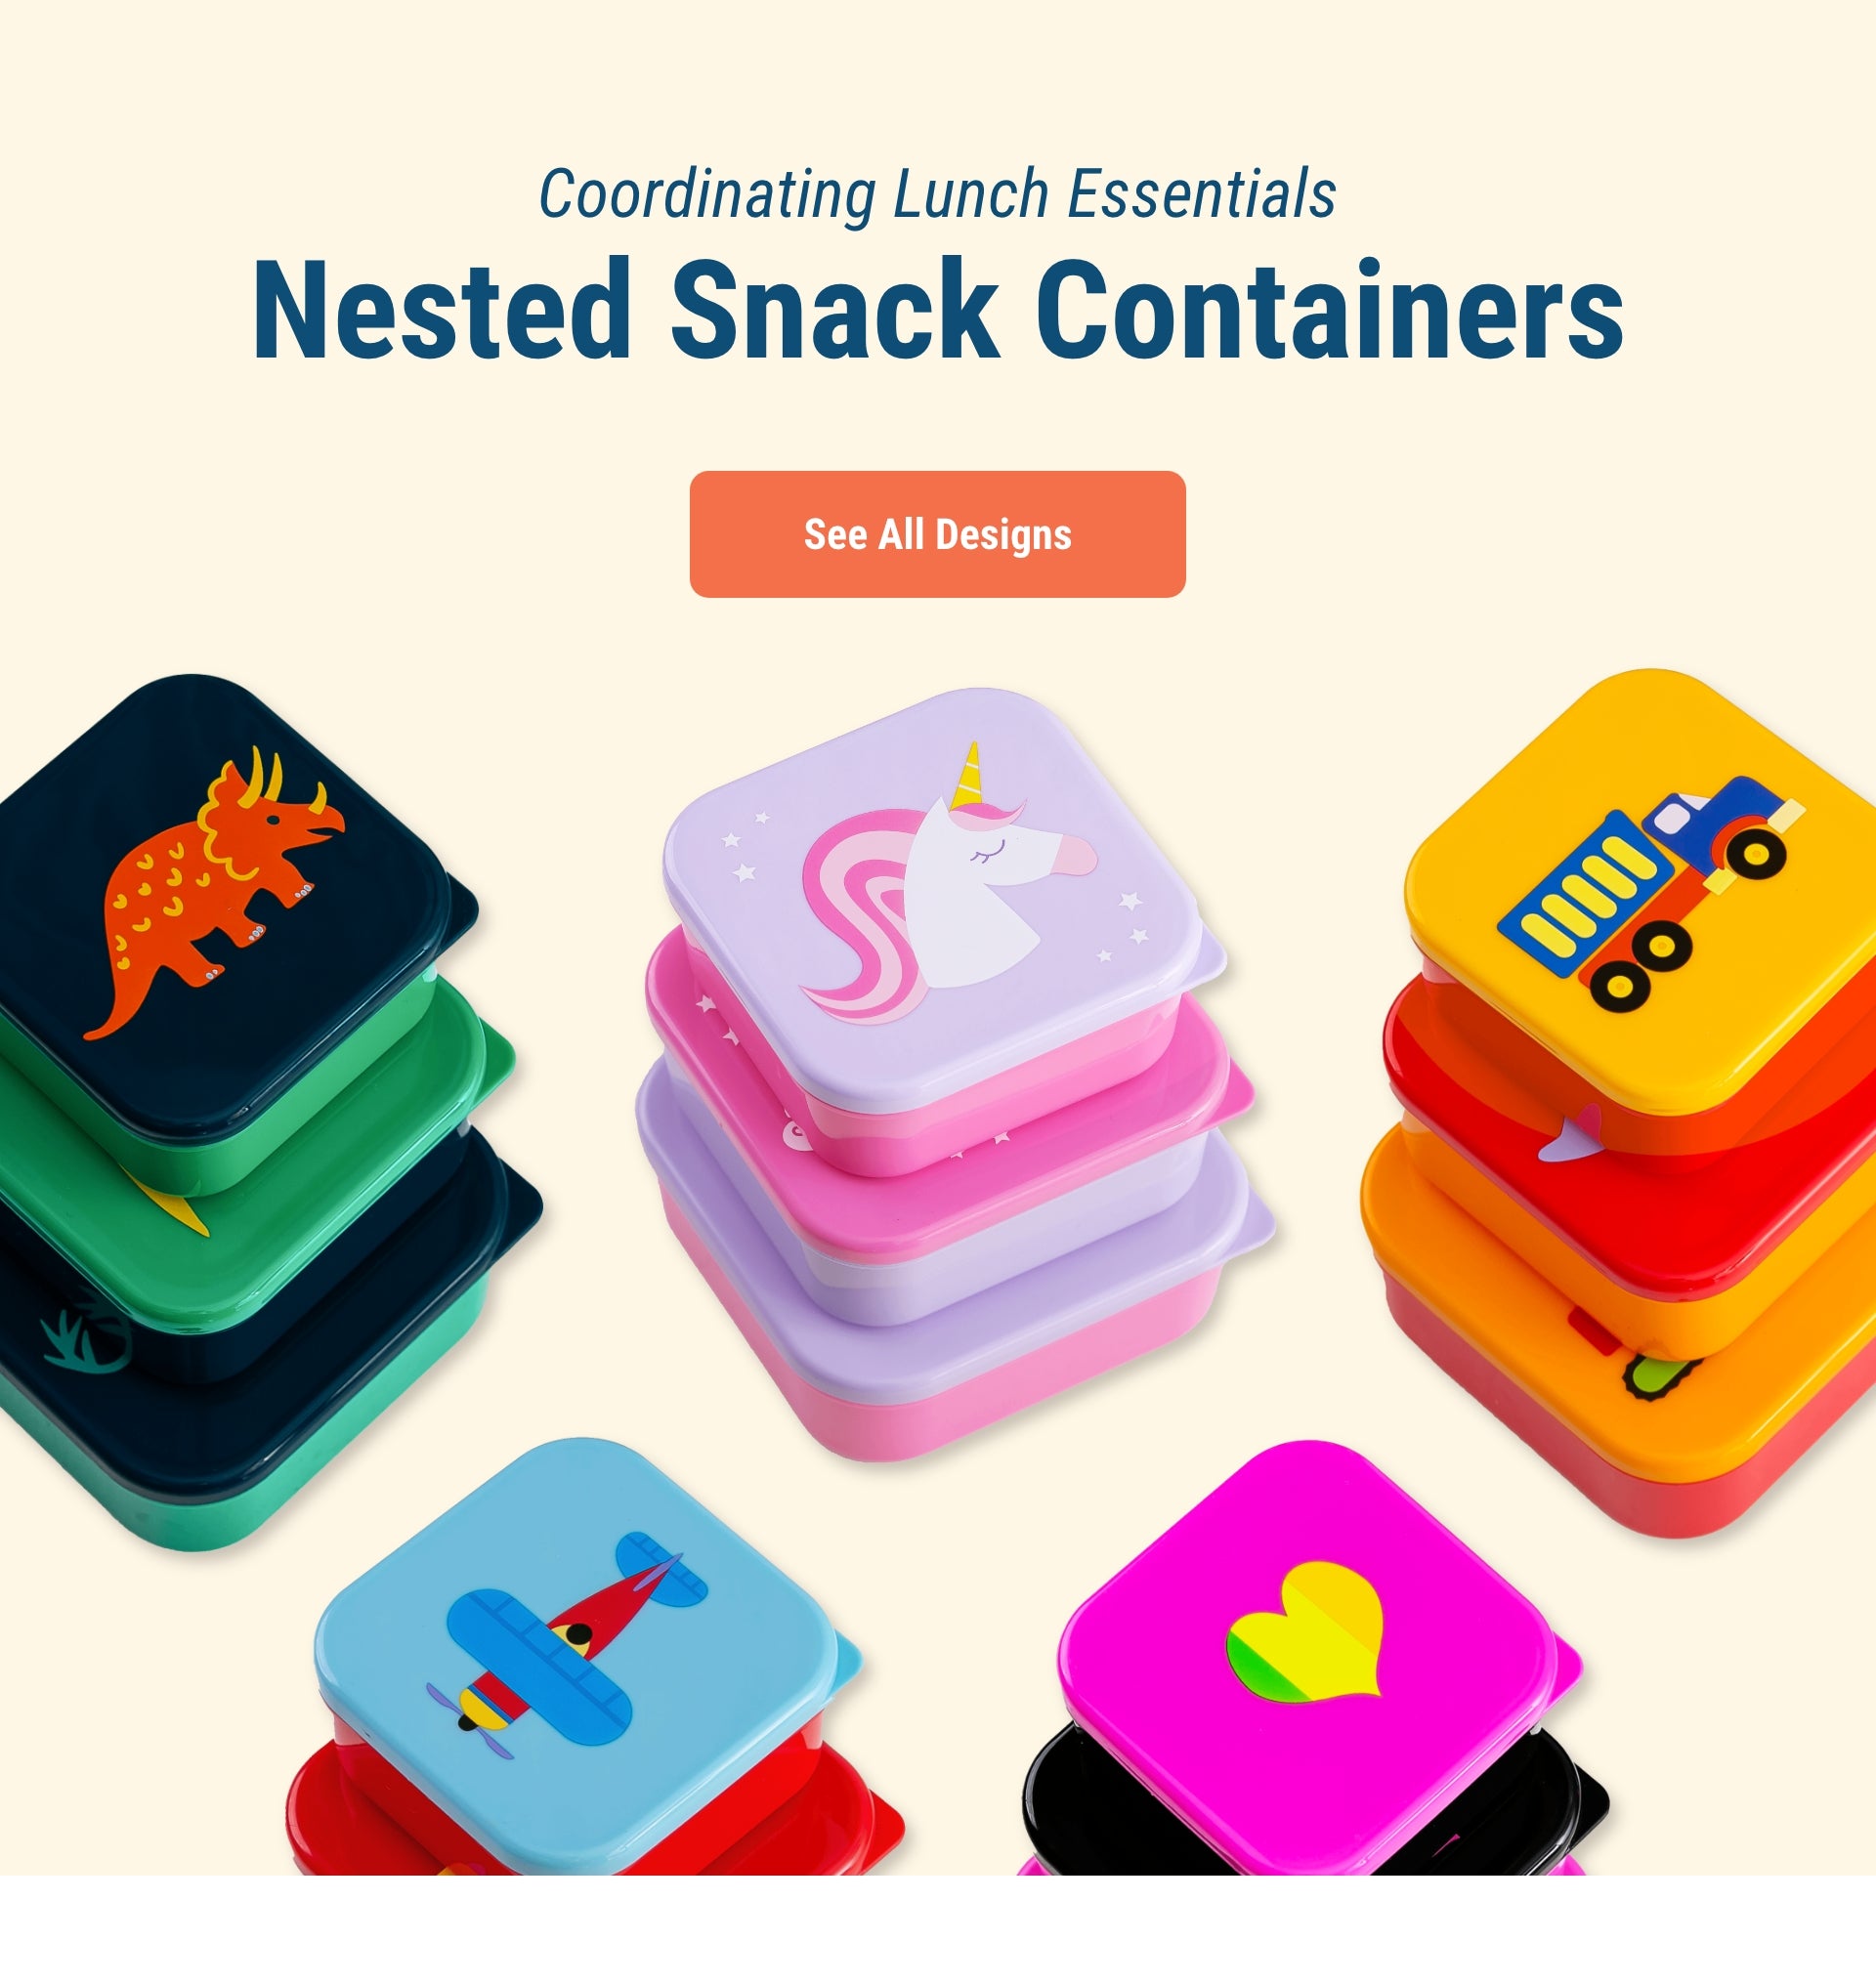 Coordinating Lunch Essentials. Nested Snack Containers. Link to See all Designs